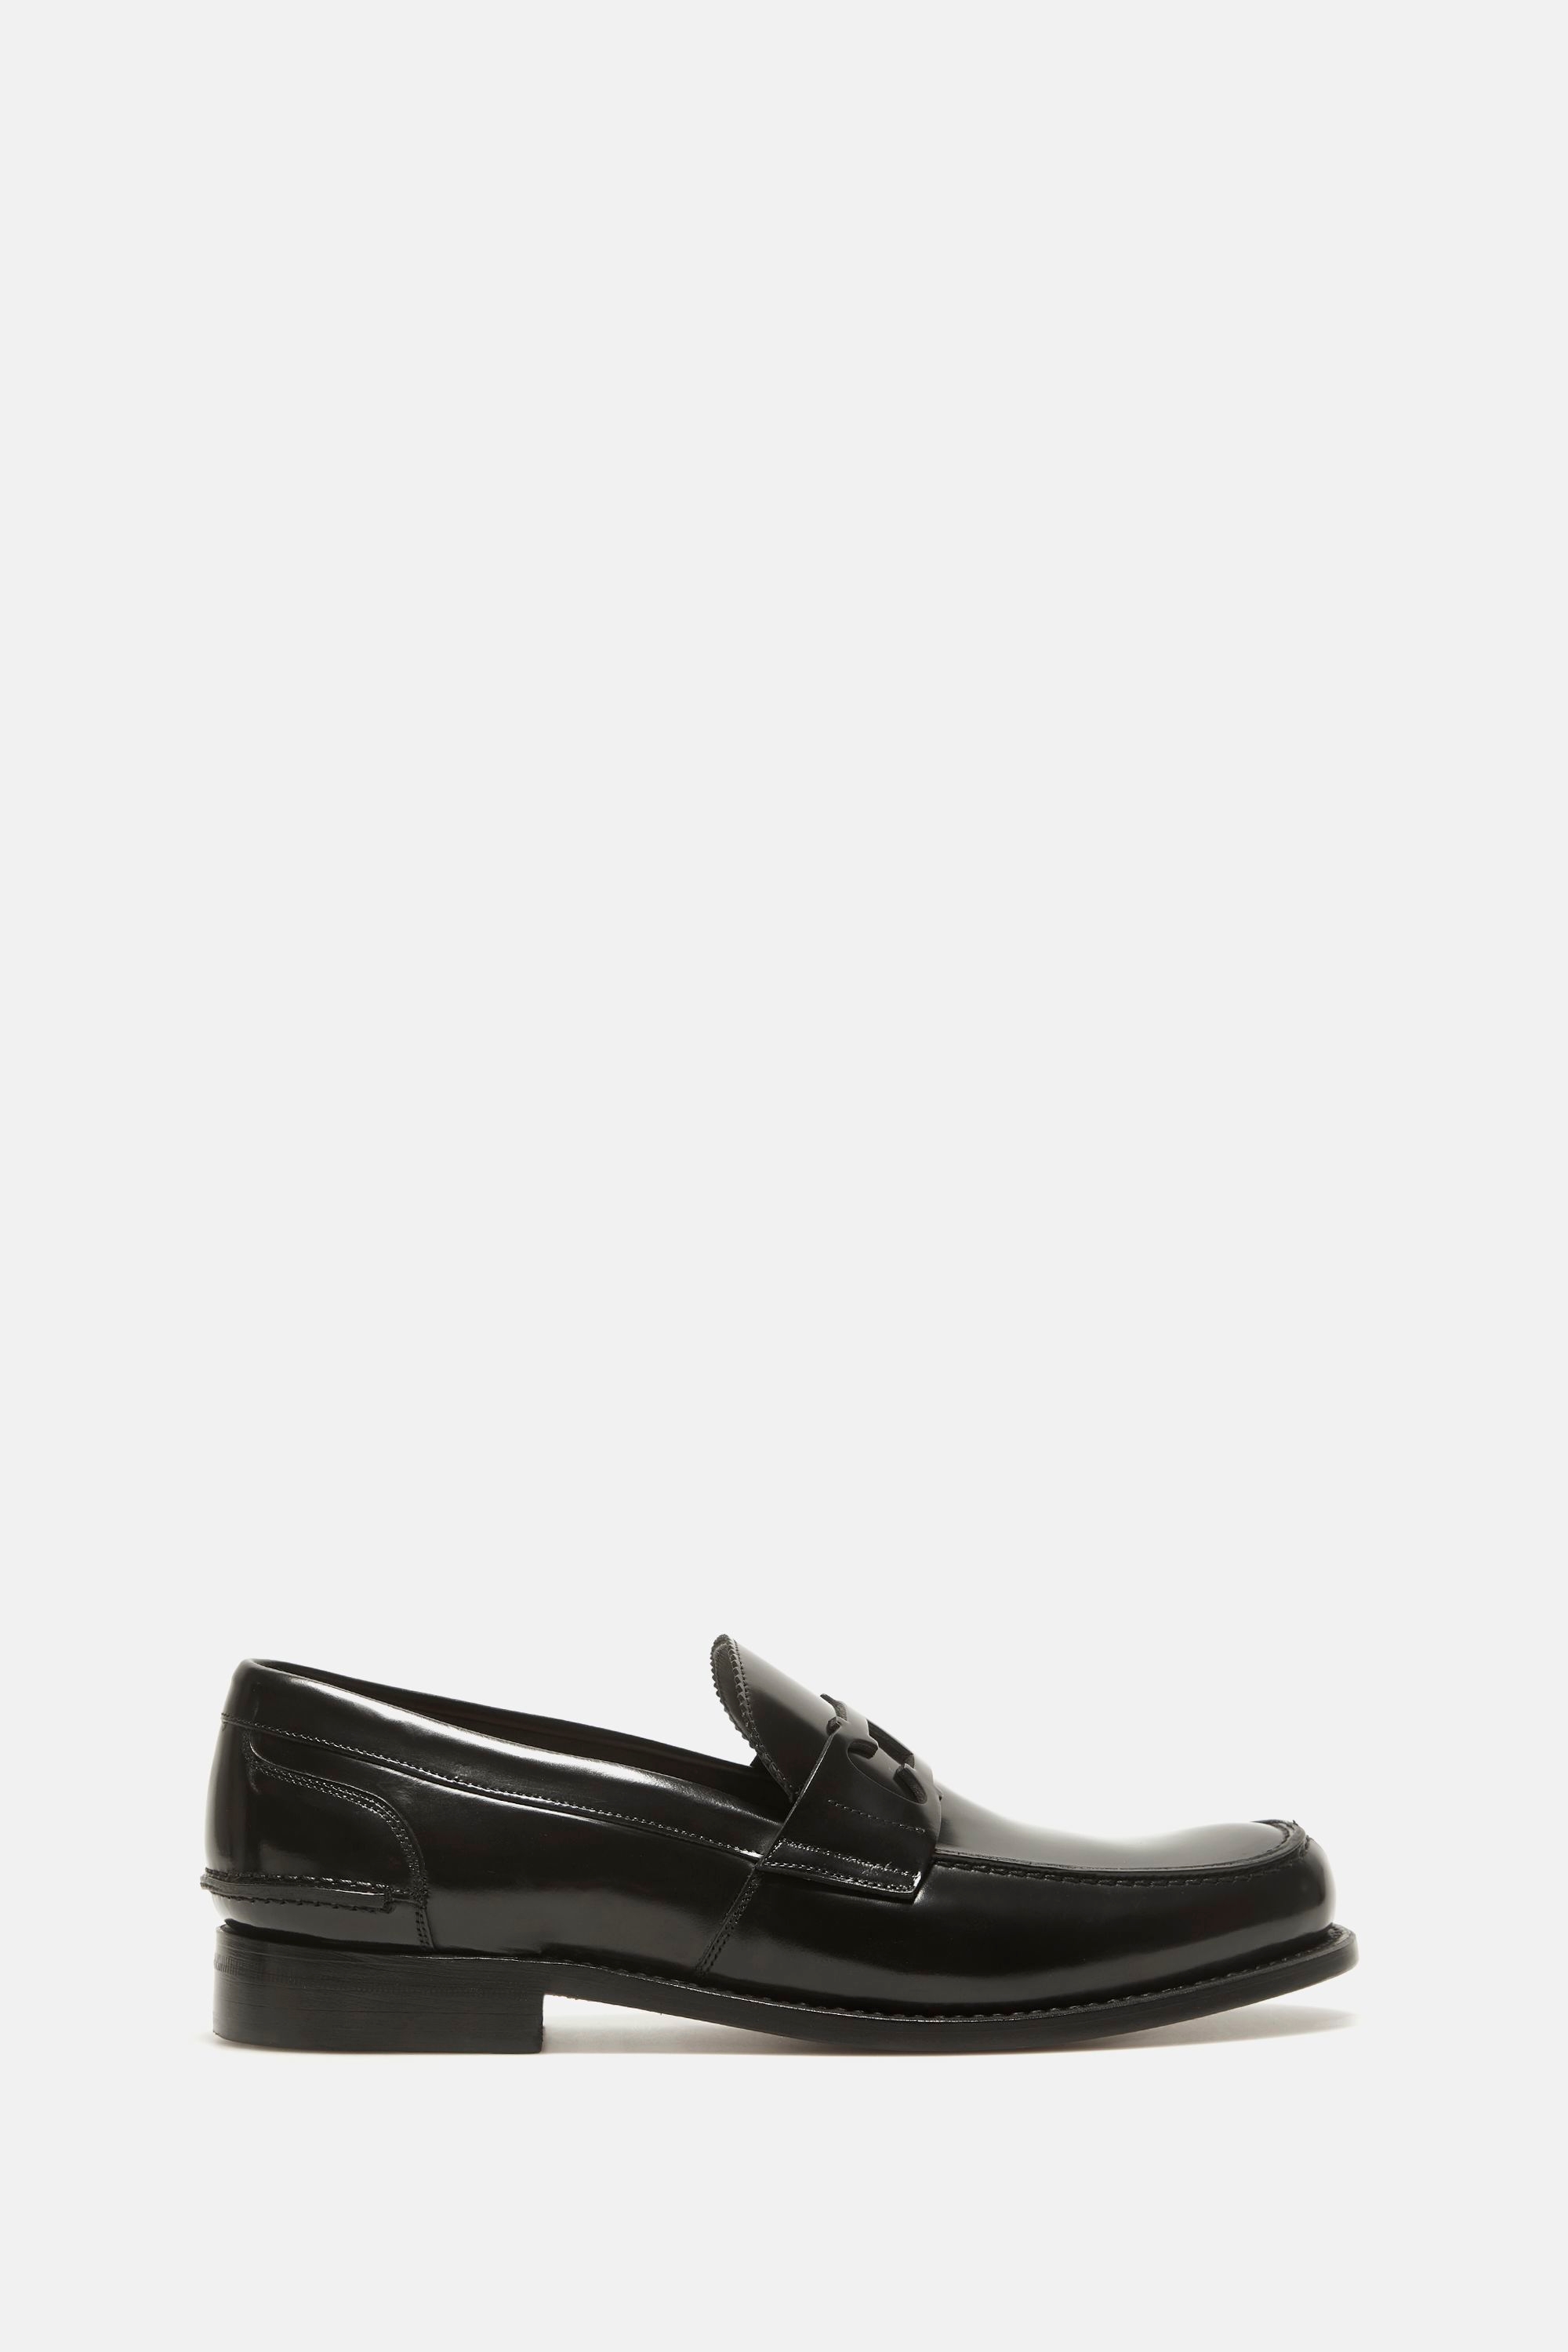 Initials Insignia cutout leather loafers